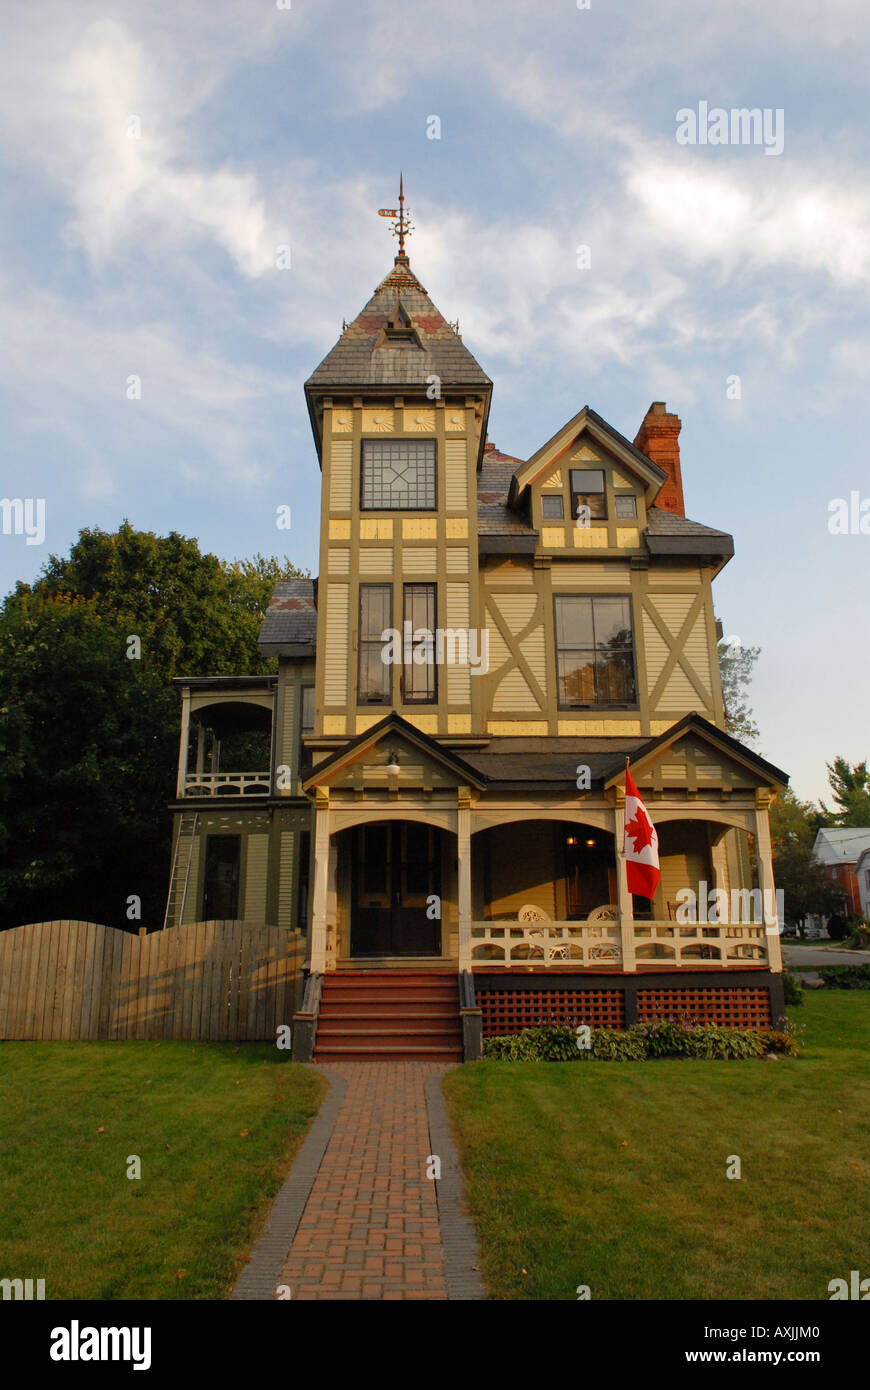 Victorian house Town of Brockville Thousand Islands region Ontario Canada Stock Photo